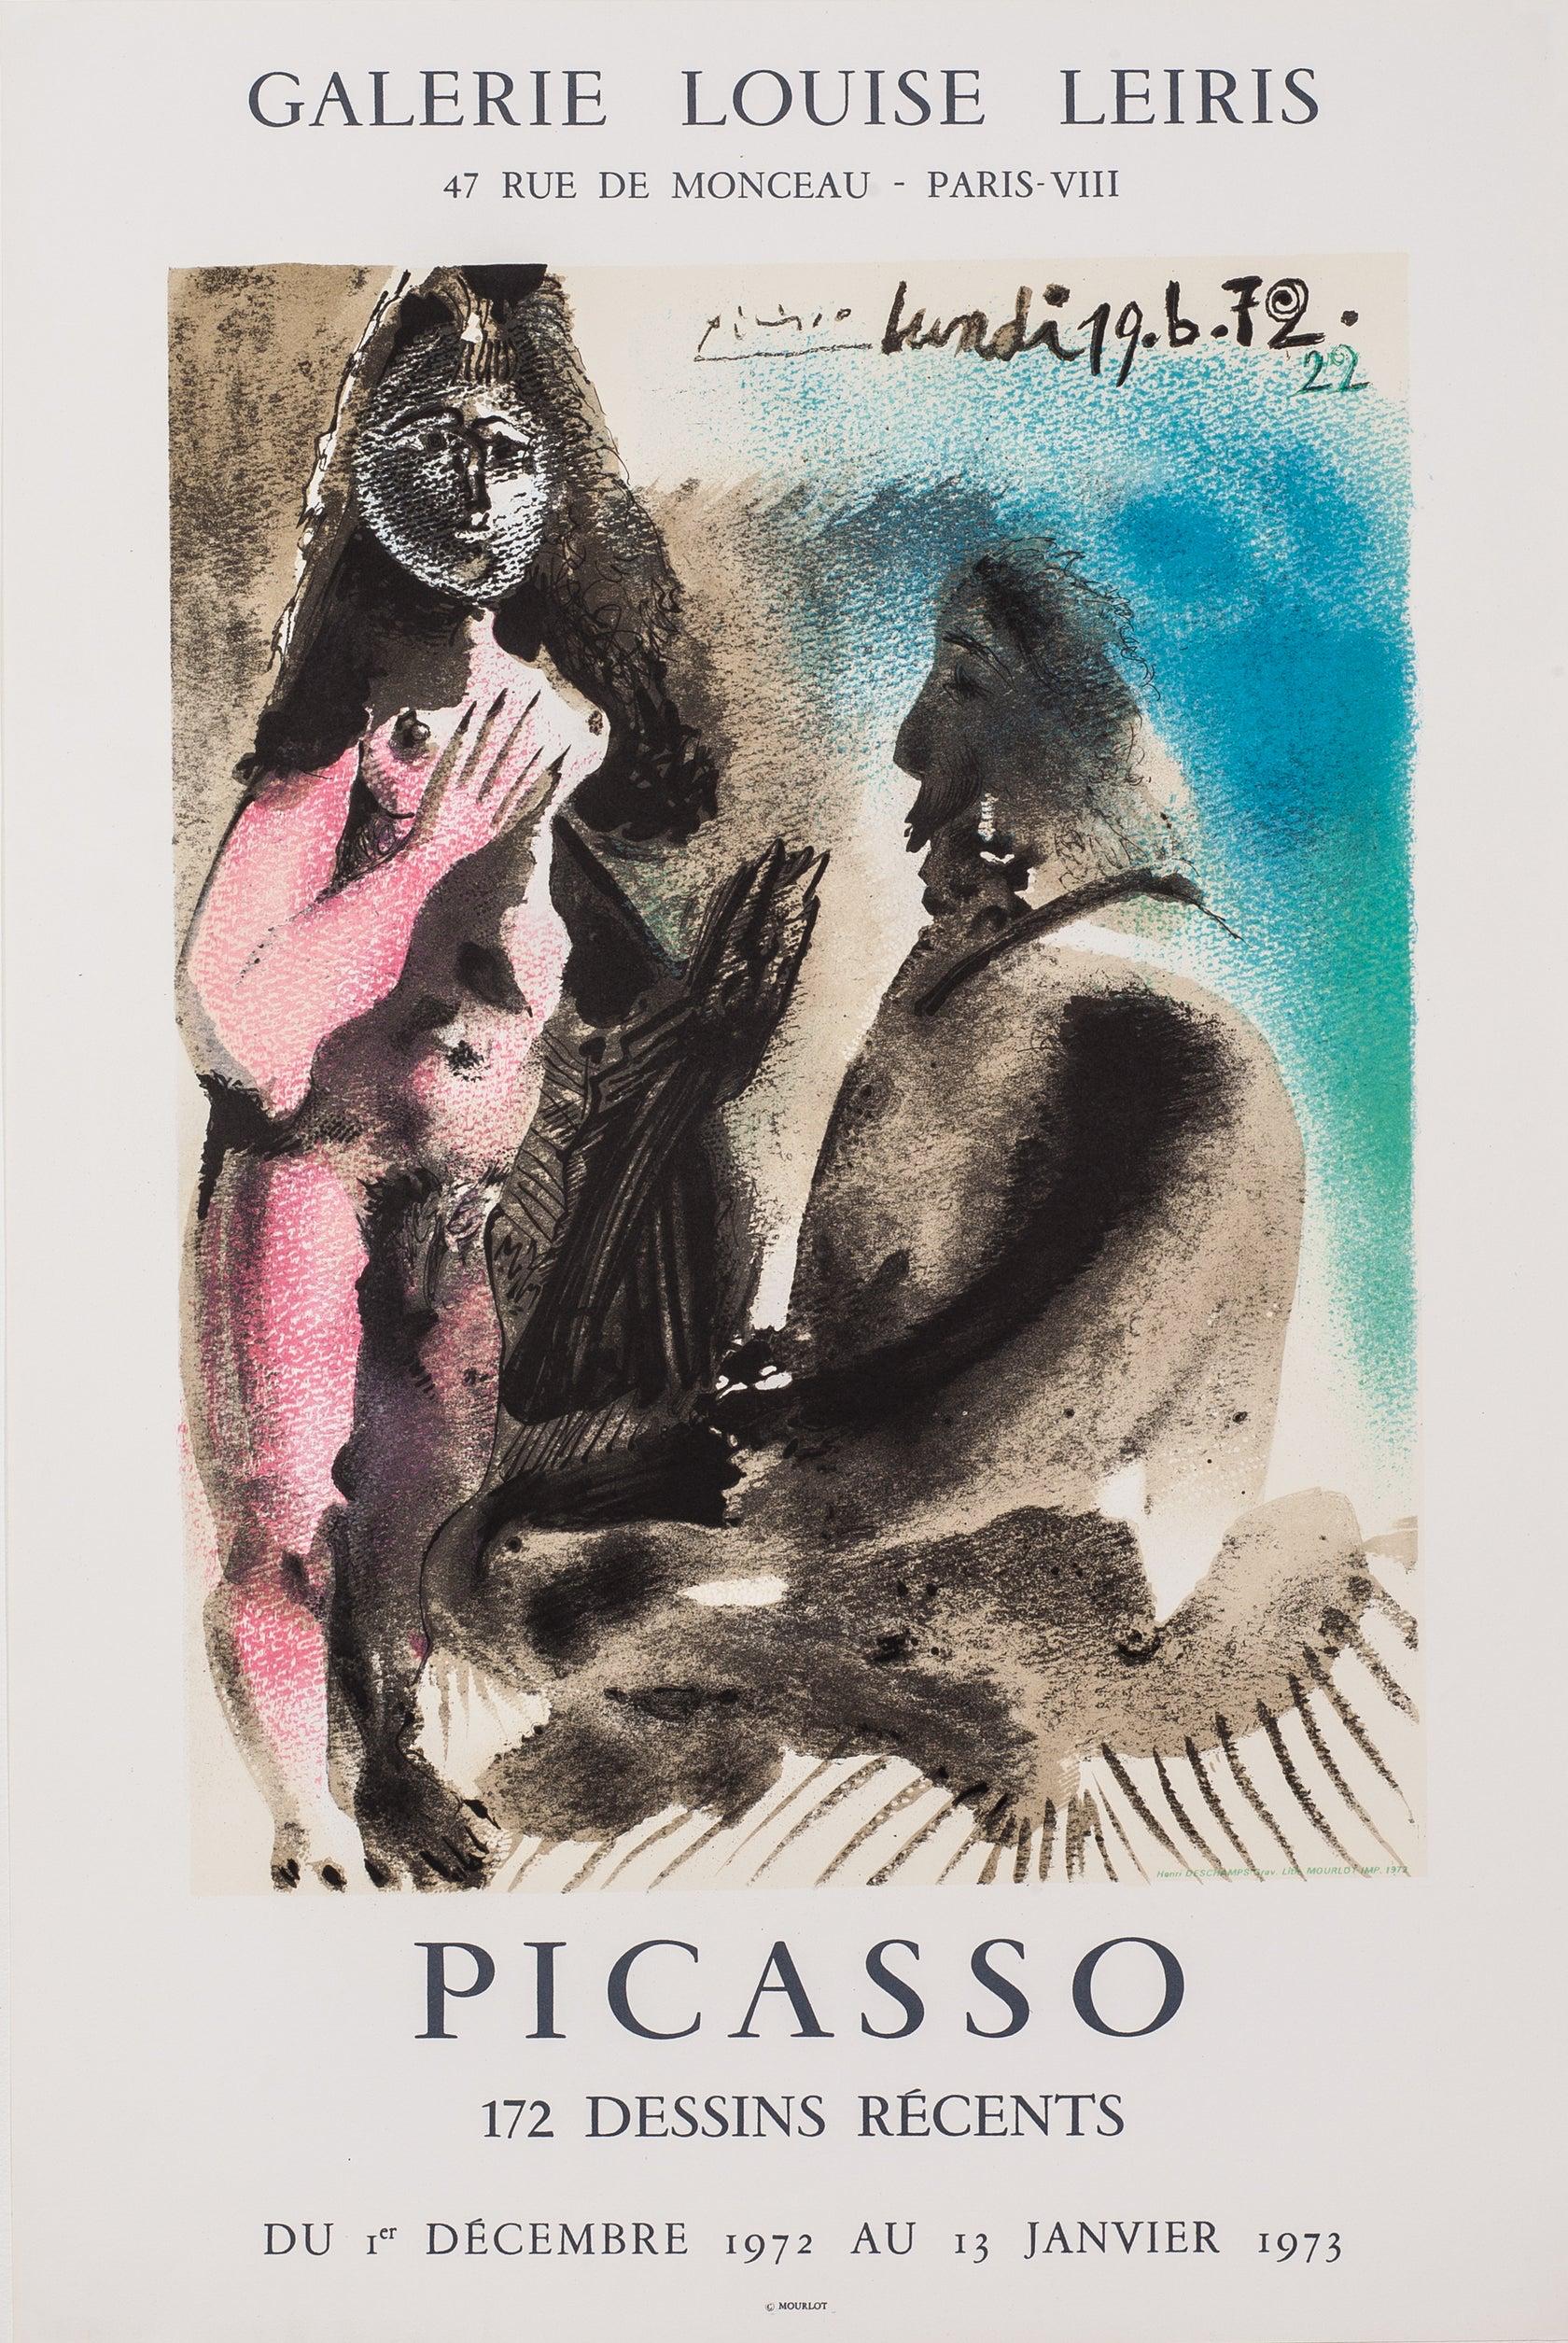 Artist: Pablo Picasso

Medium: Lithographic Poster, 1972

Dimensions: 28.5 x 19 in, 72.4 x 48.3 cm

Classic Poster Paper - Perfect Condition A+

This lithographic poster was designed to advertise an exhibition of 172 recent drawings by Pablo Picasso